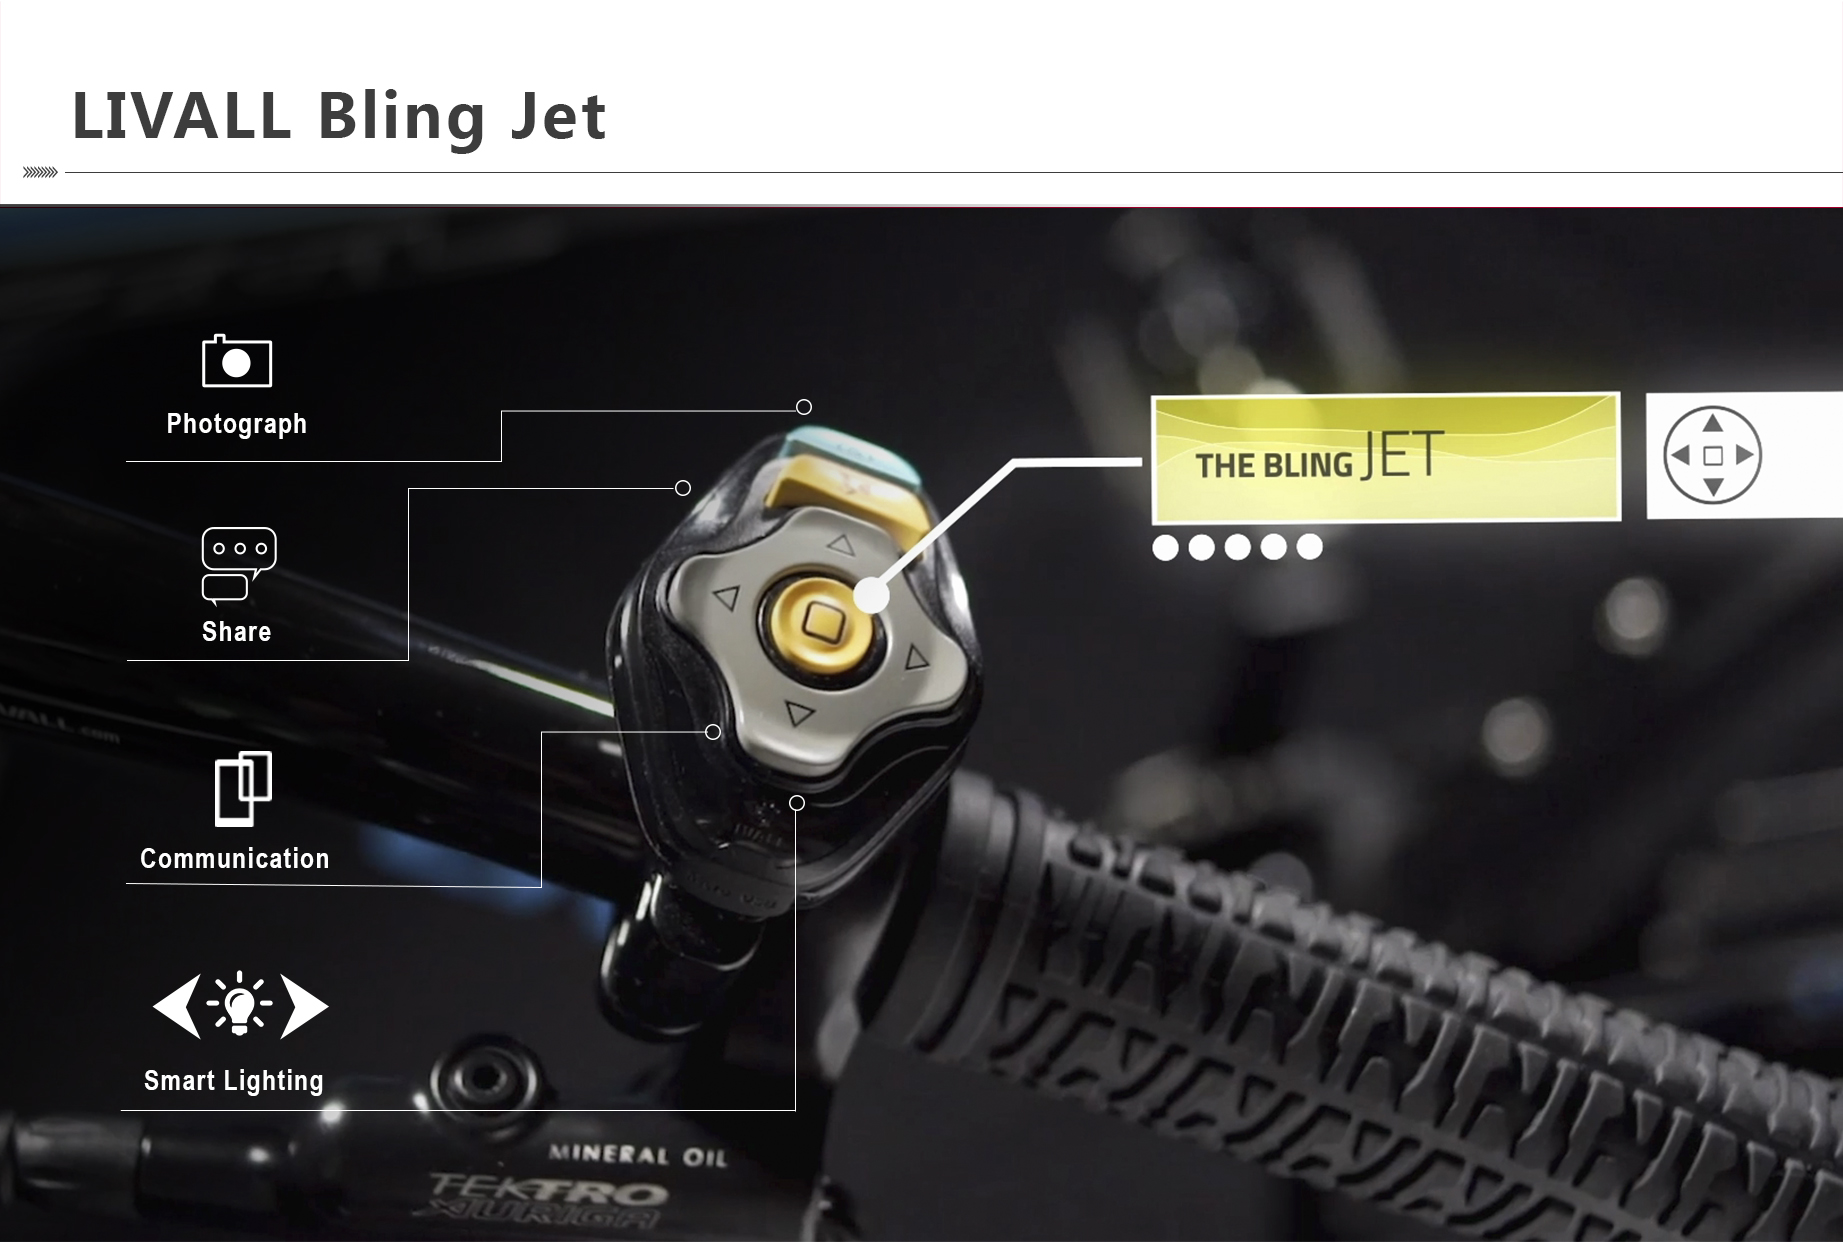 LIVALL Bling Jet Remote Control